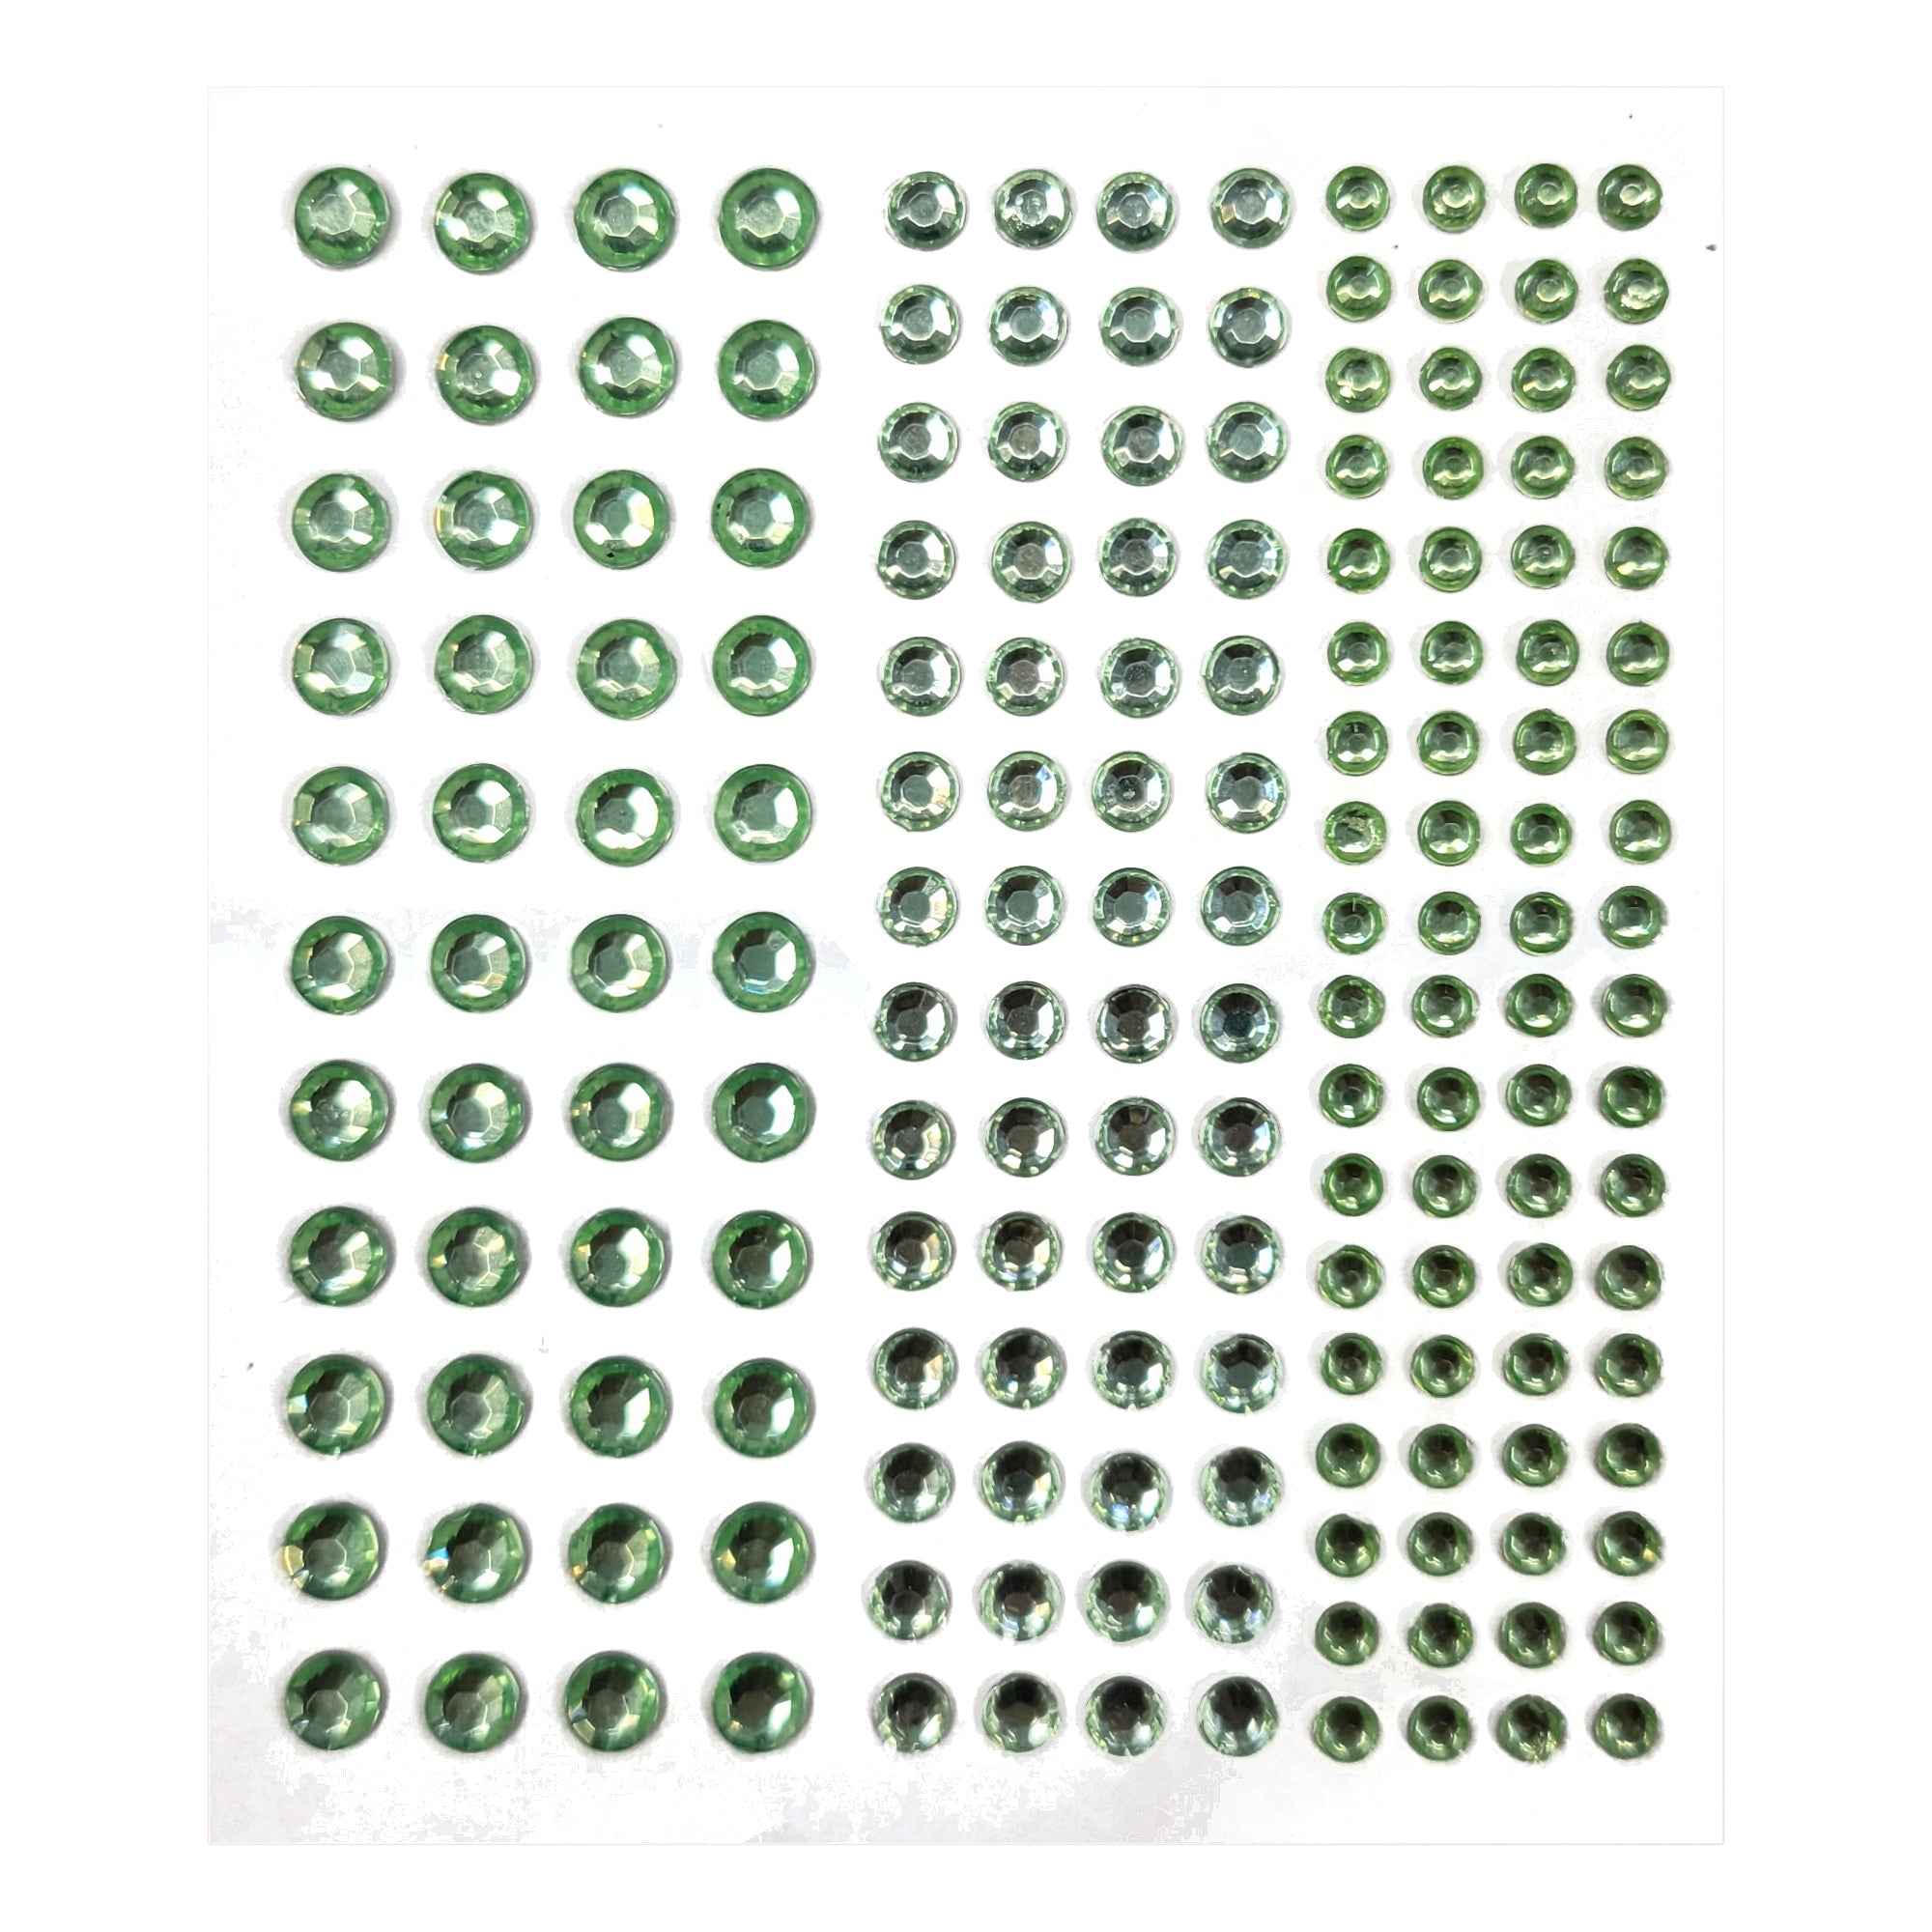 Basically Bling Collection 3, 4 & 5 mm Light Green Gem Scrapbook Embellishments by SSC Designs - 172 Pieces